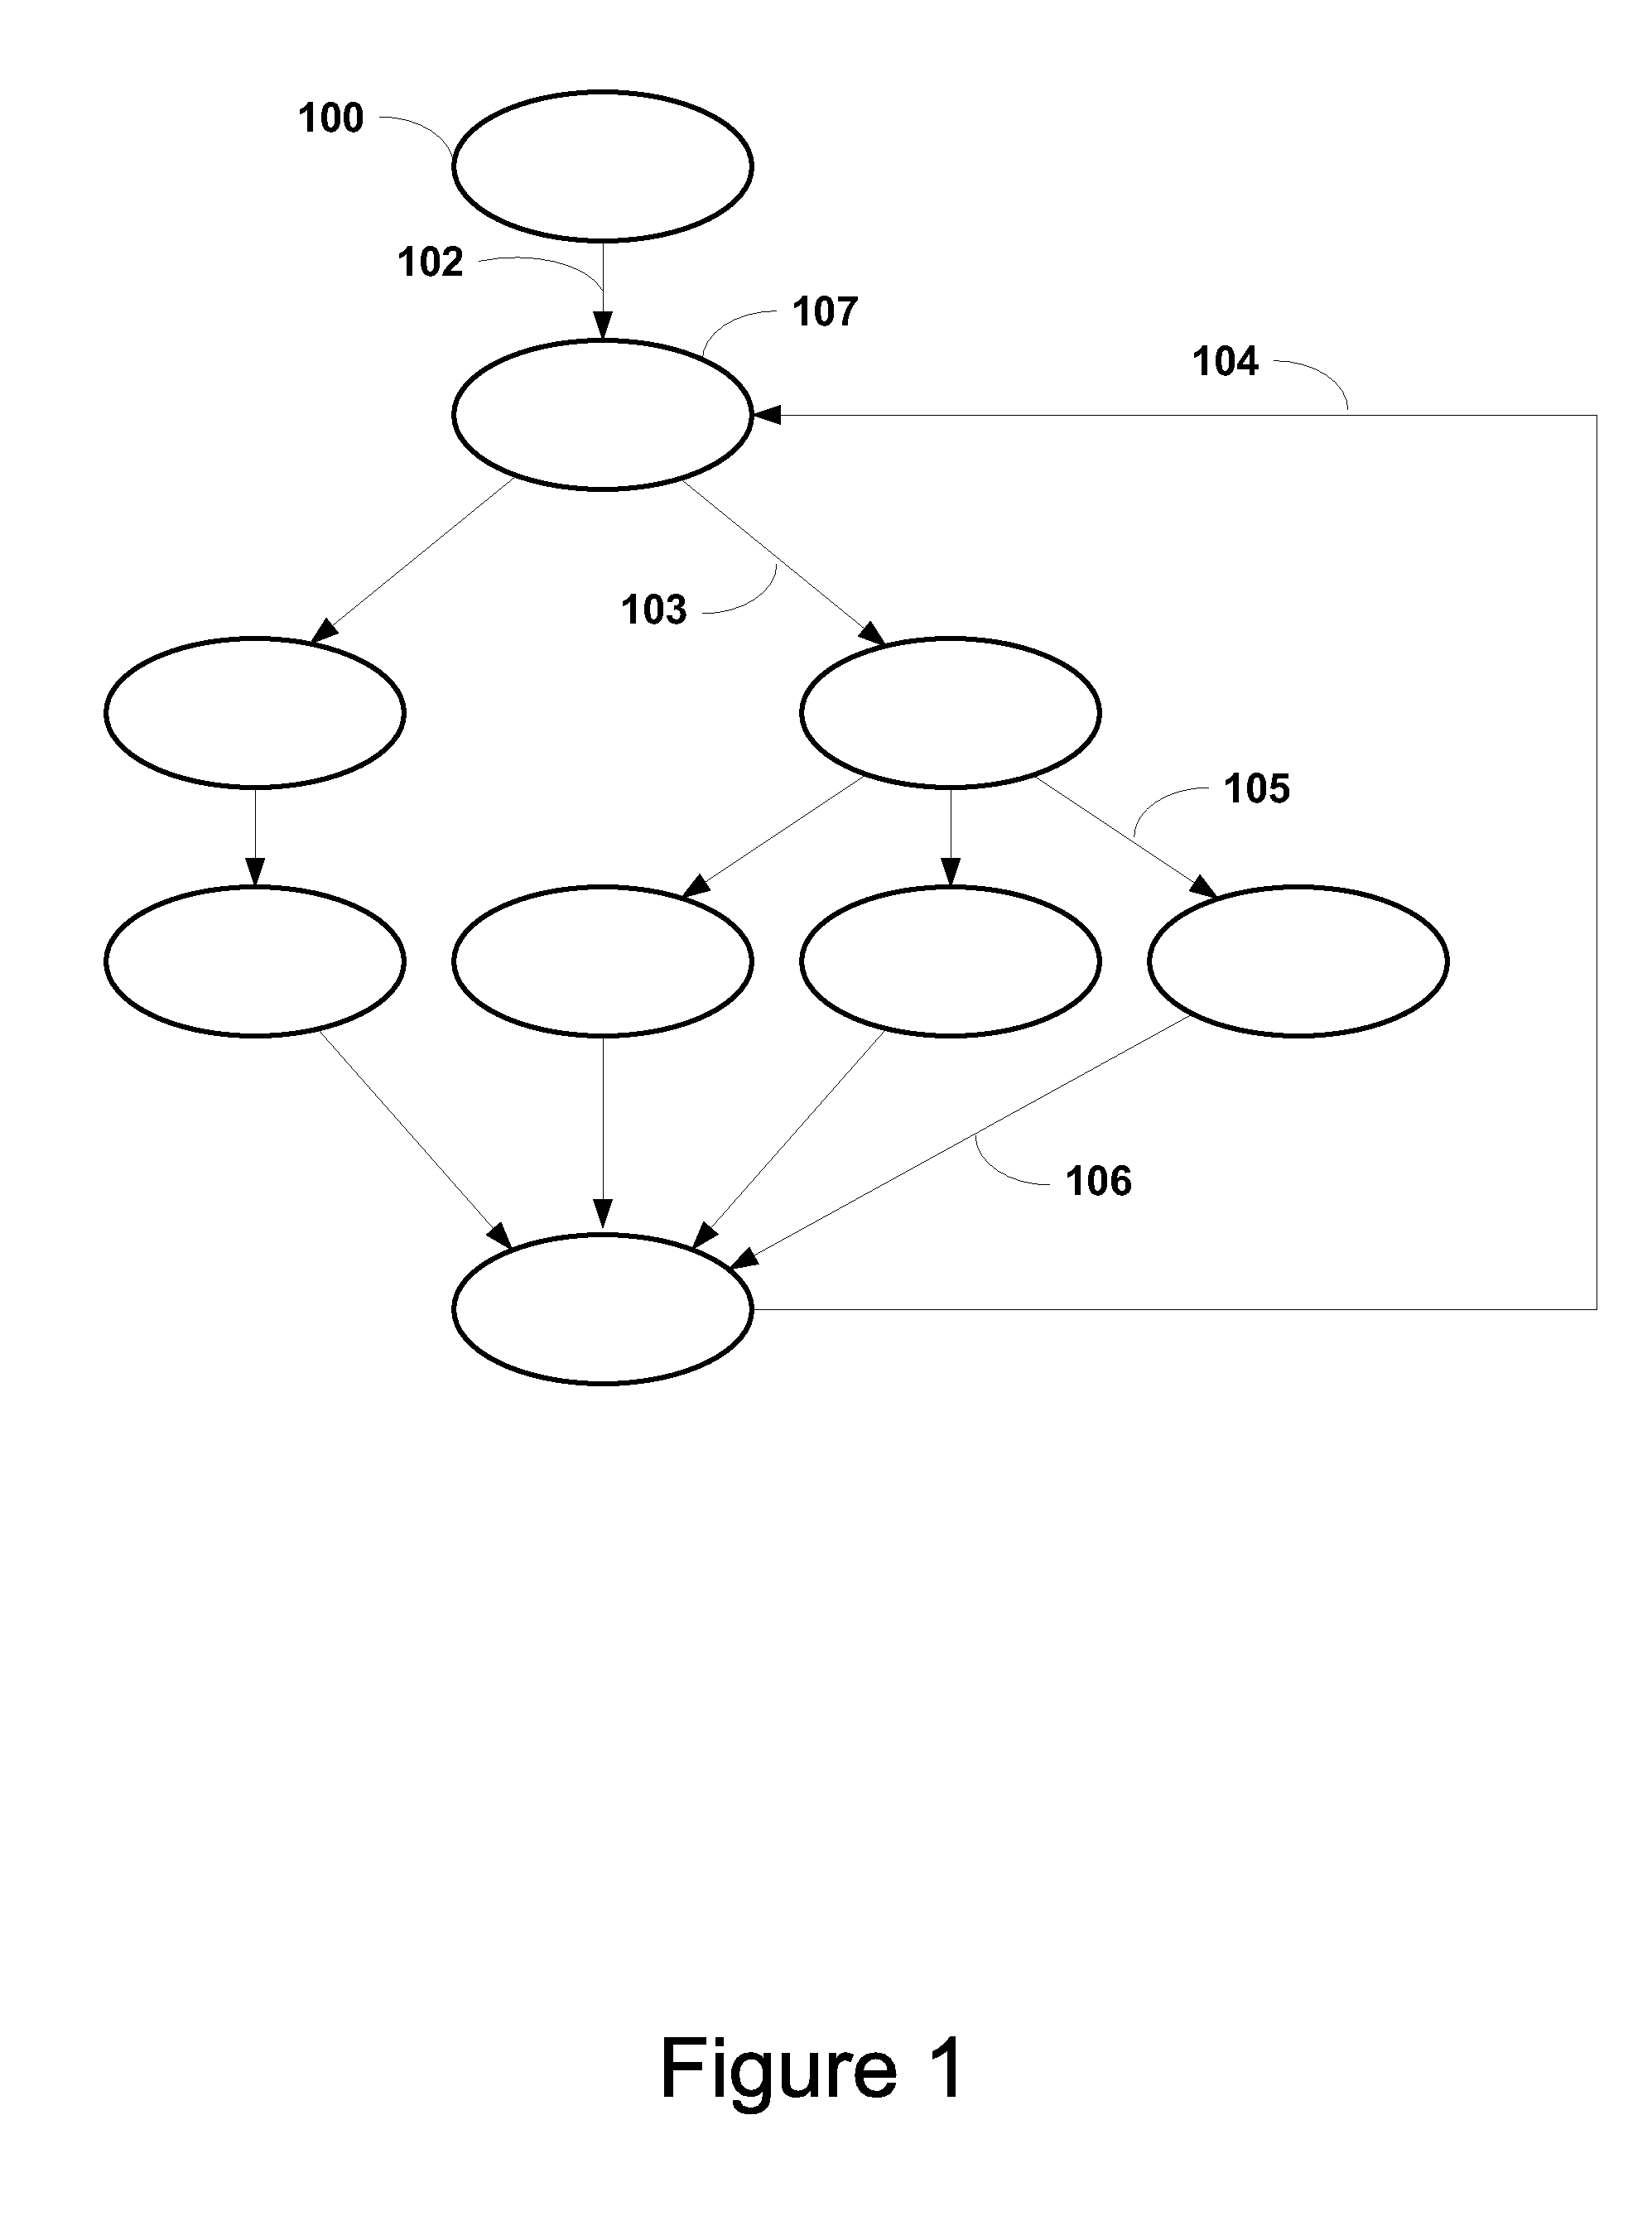 Methods for selectively pruning false paths in graphs that use high-precision state information